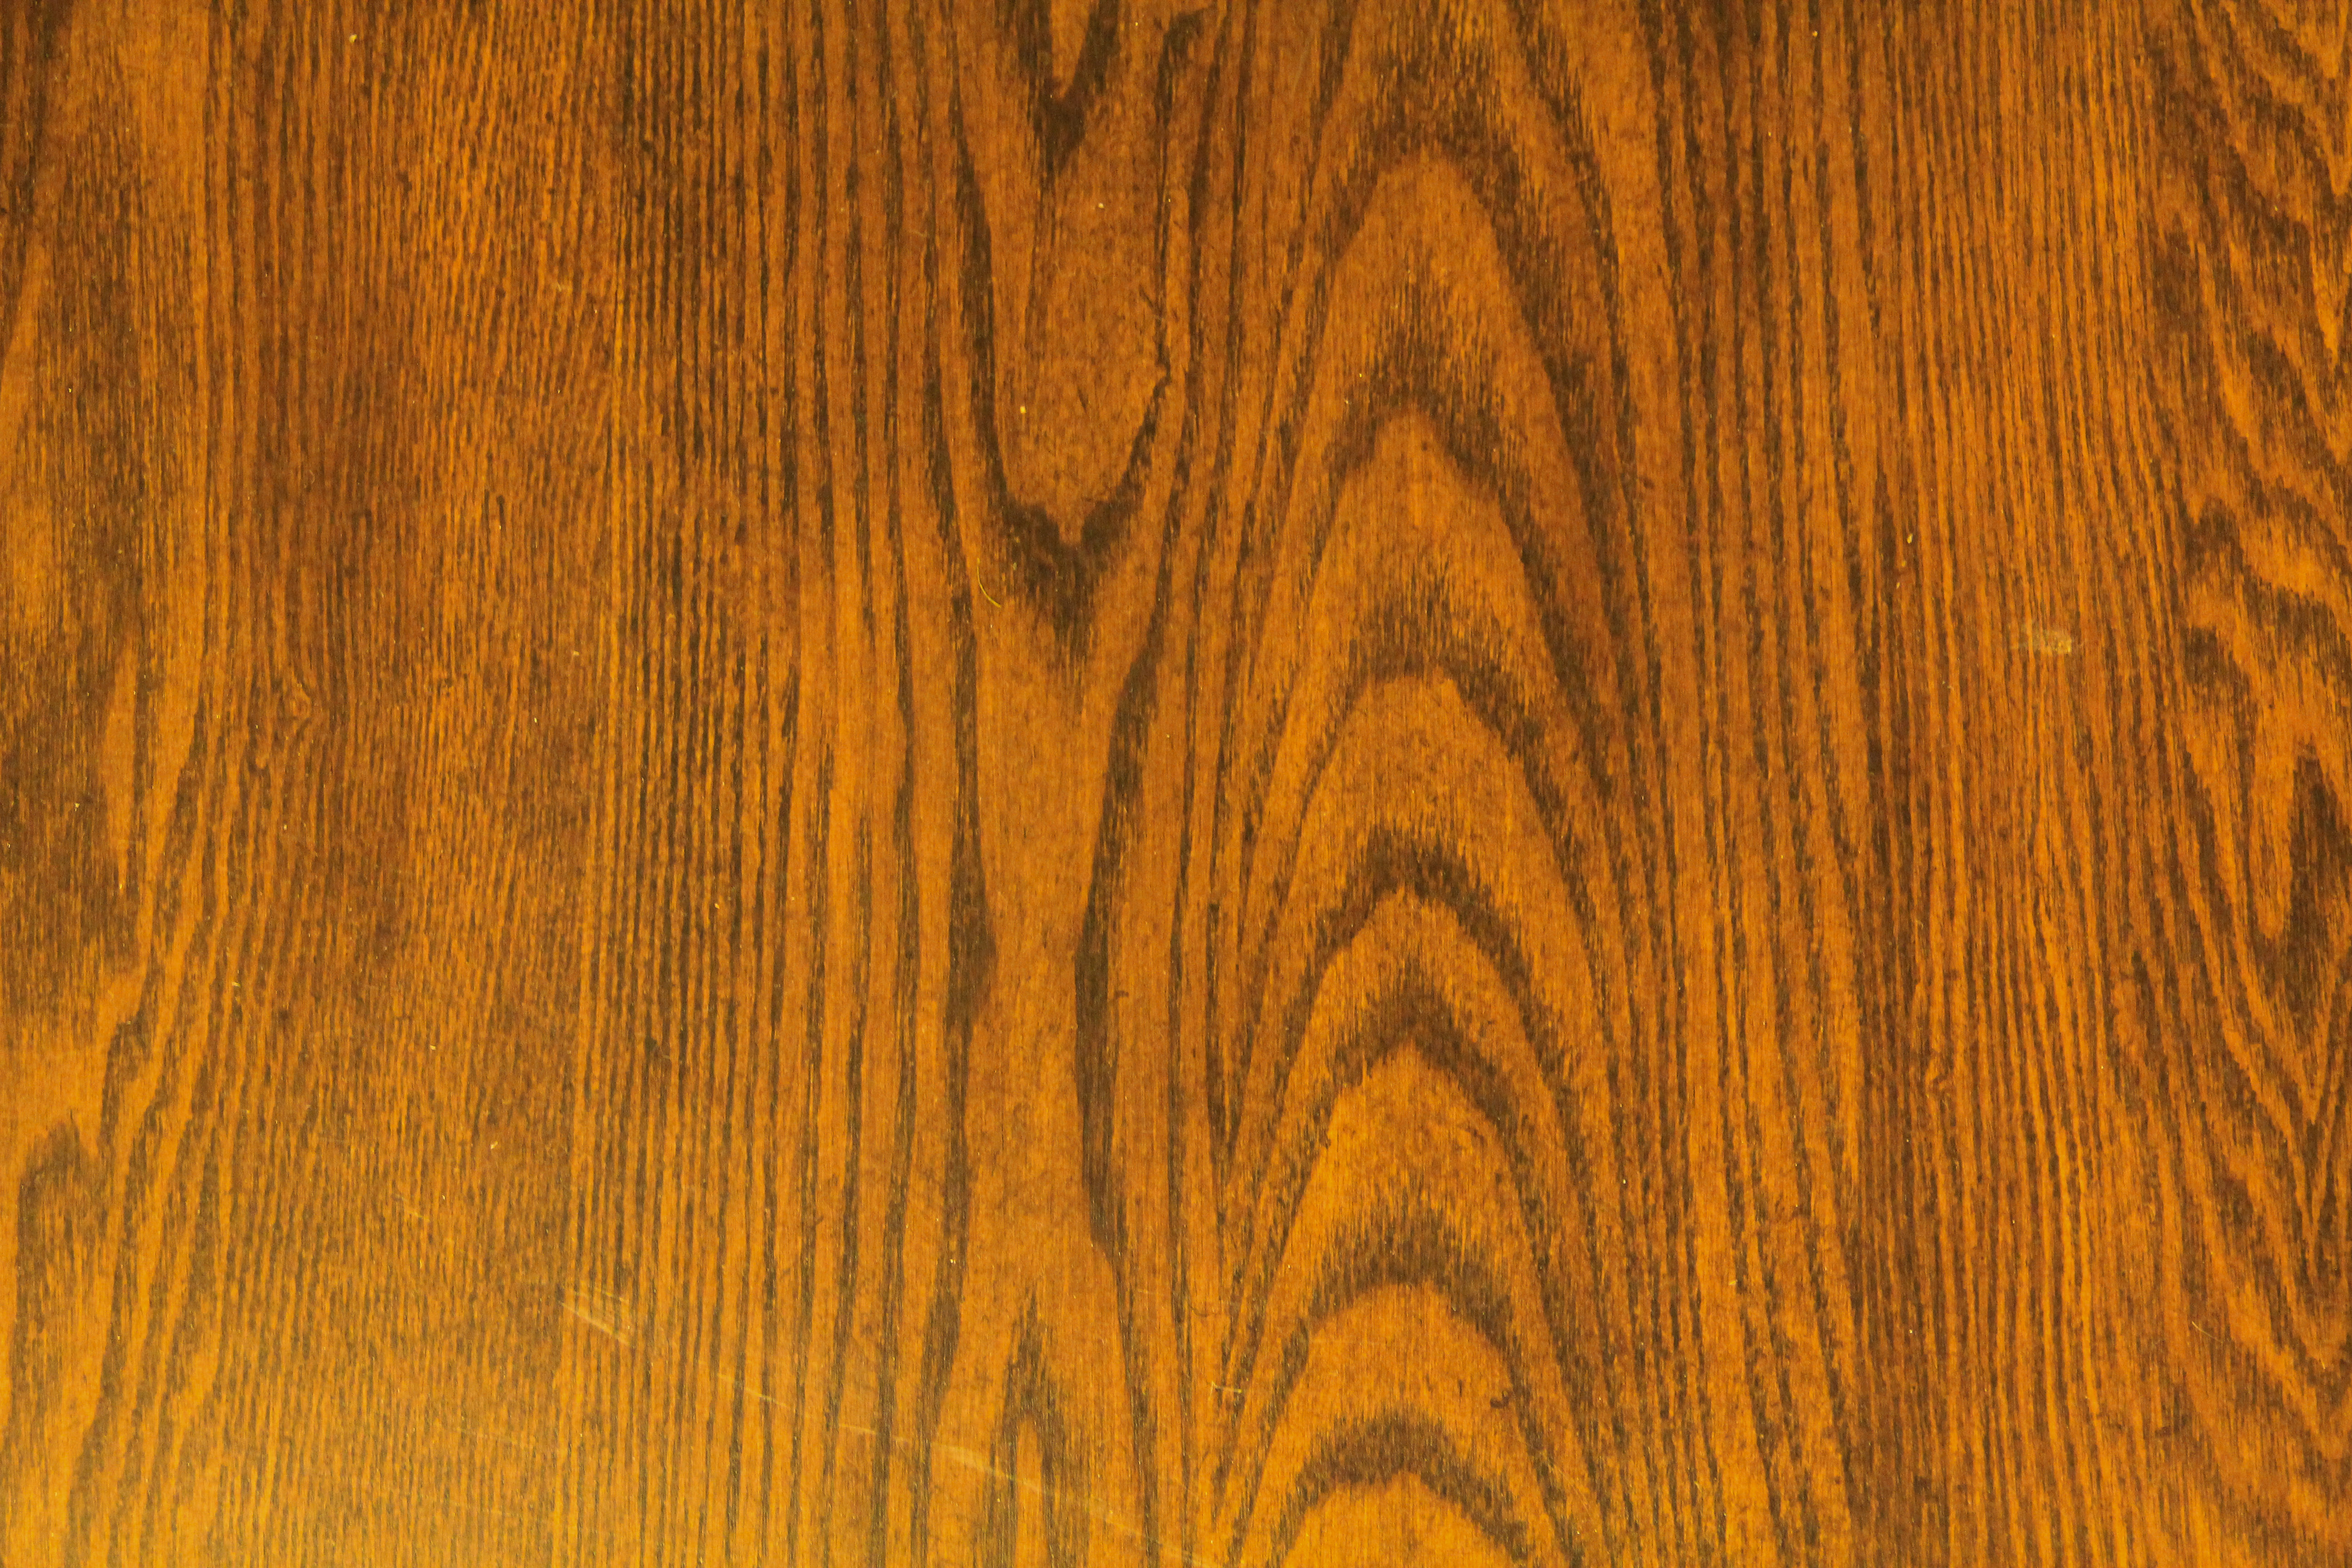 Wood Textures Archives - Texture X